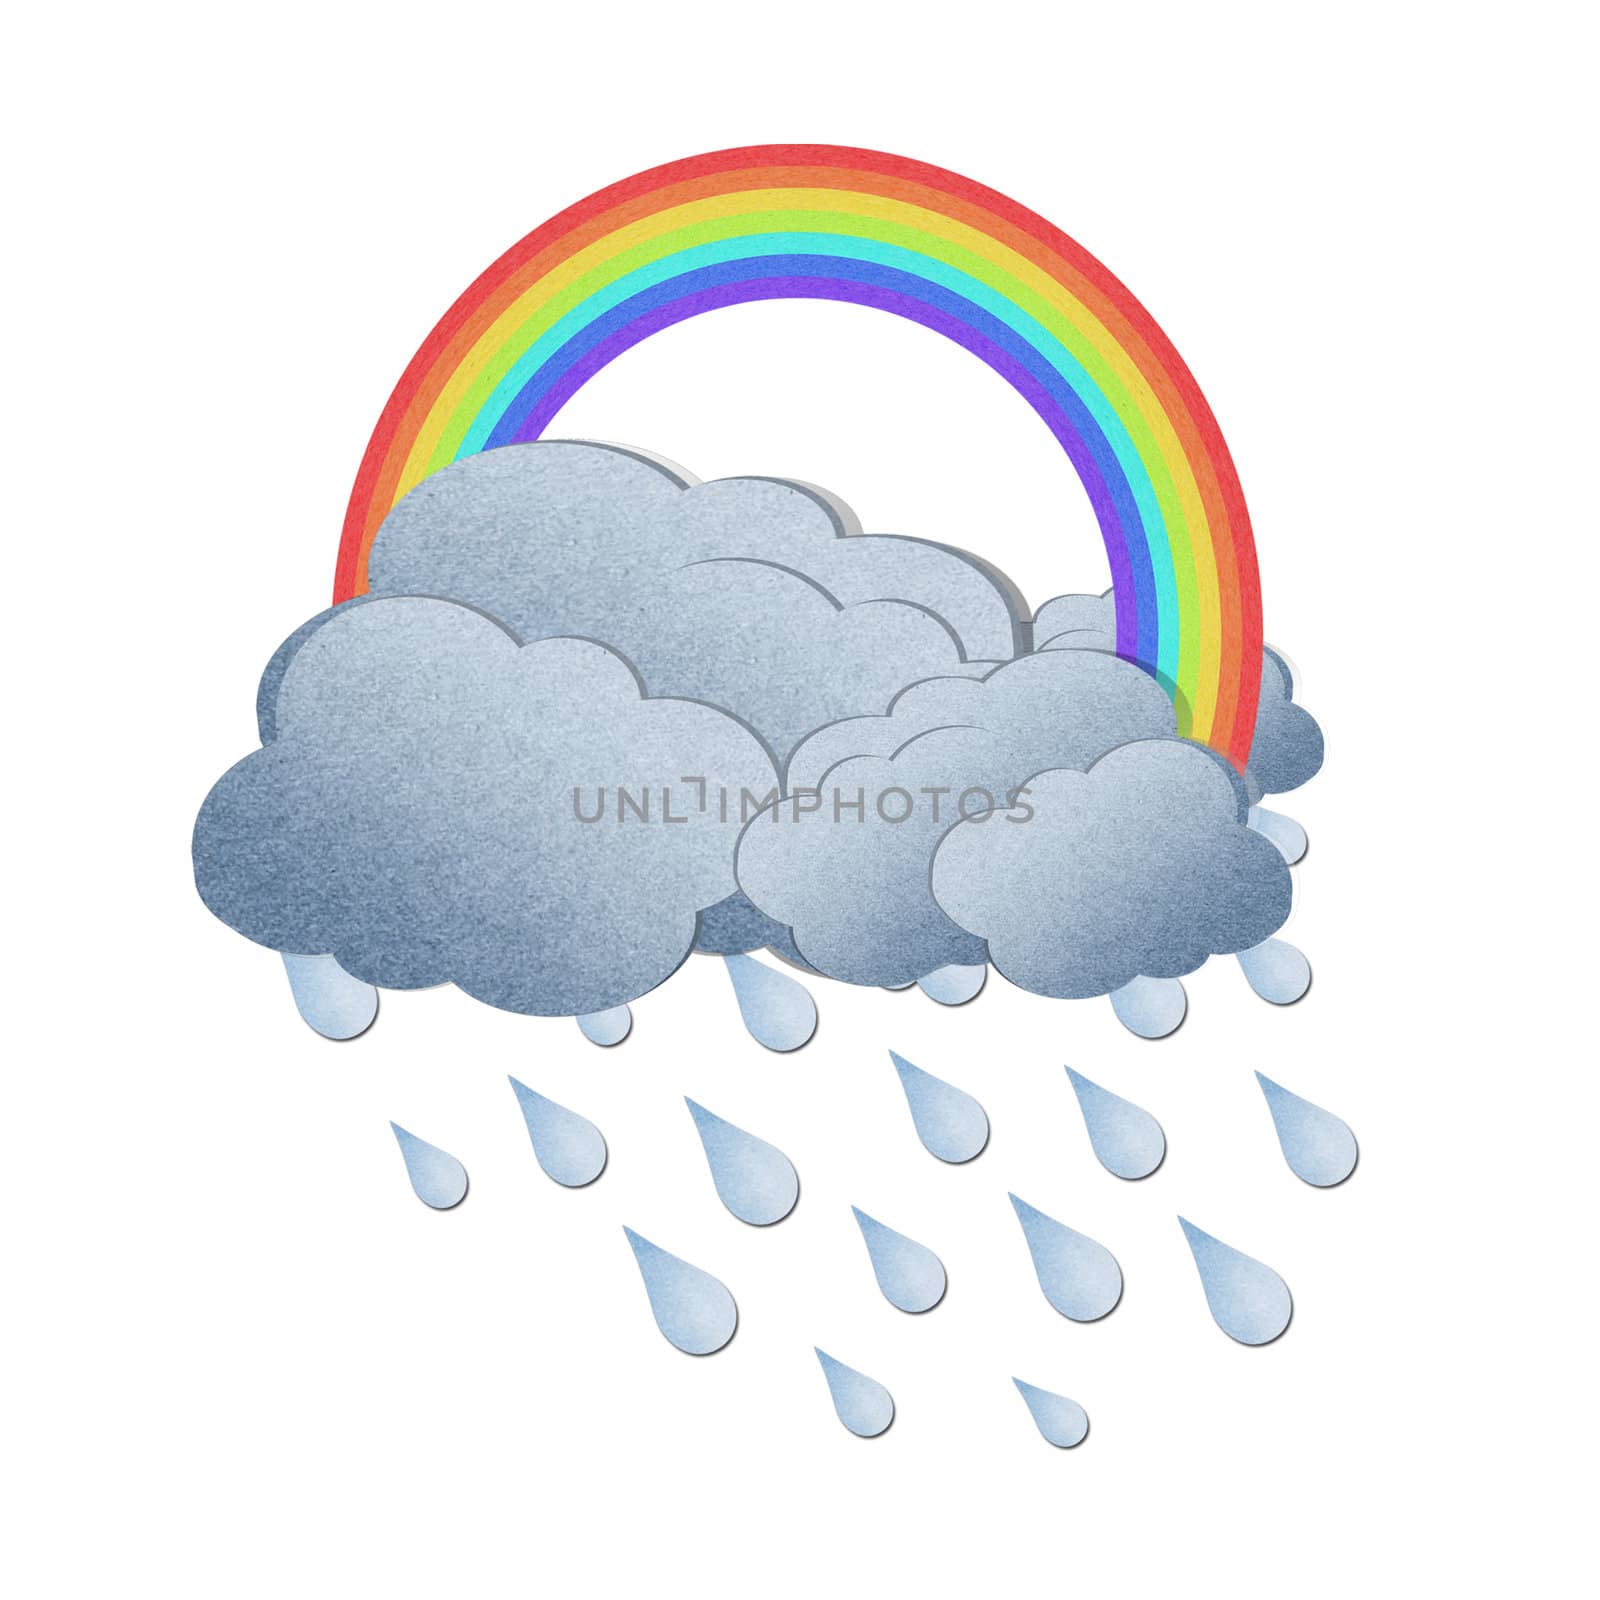  Grunge recycled paper rainbow with rain on white background